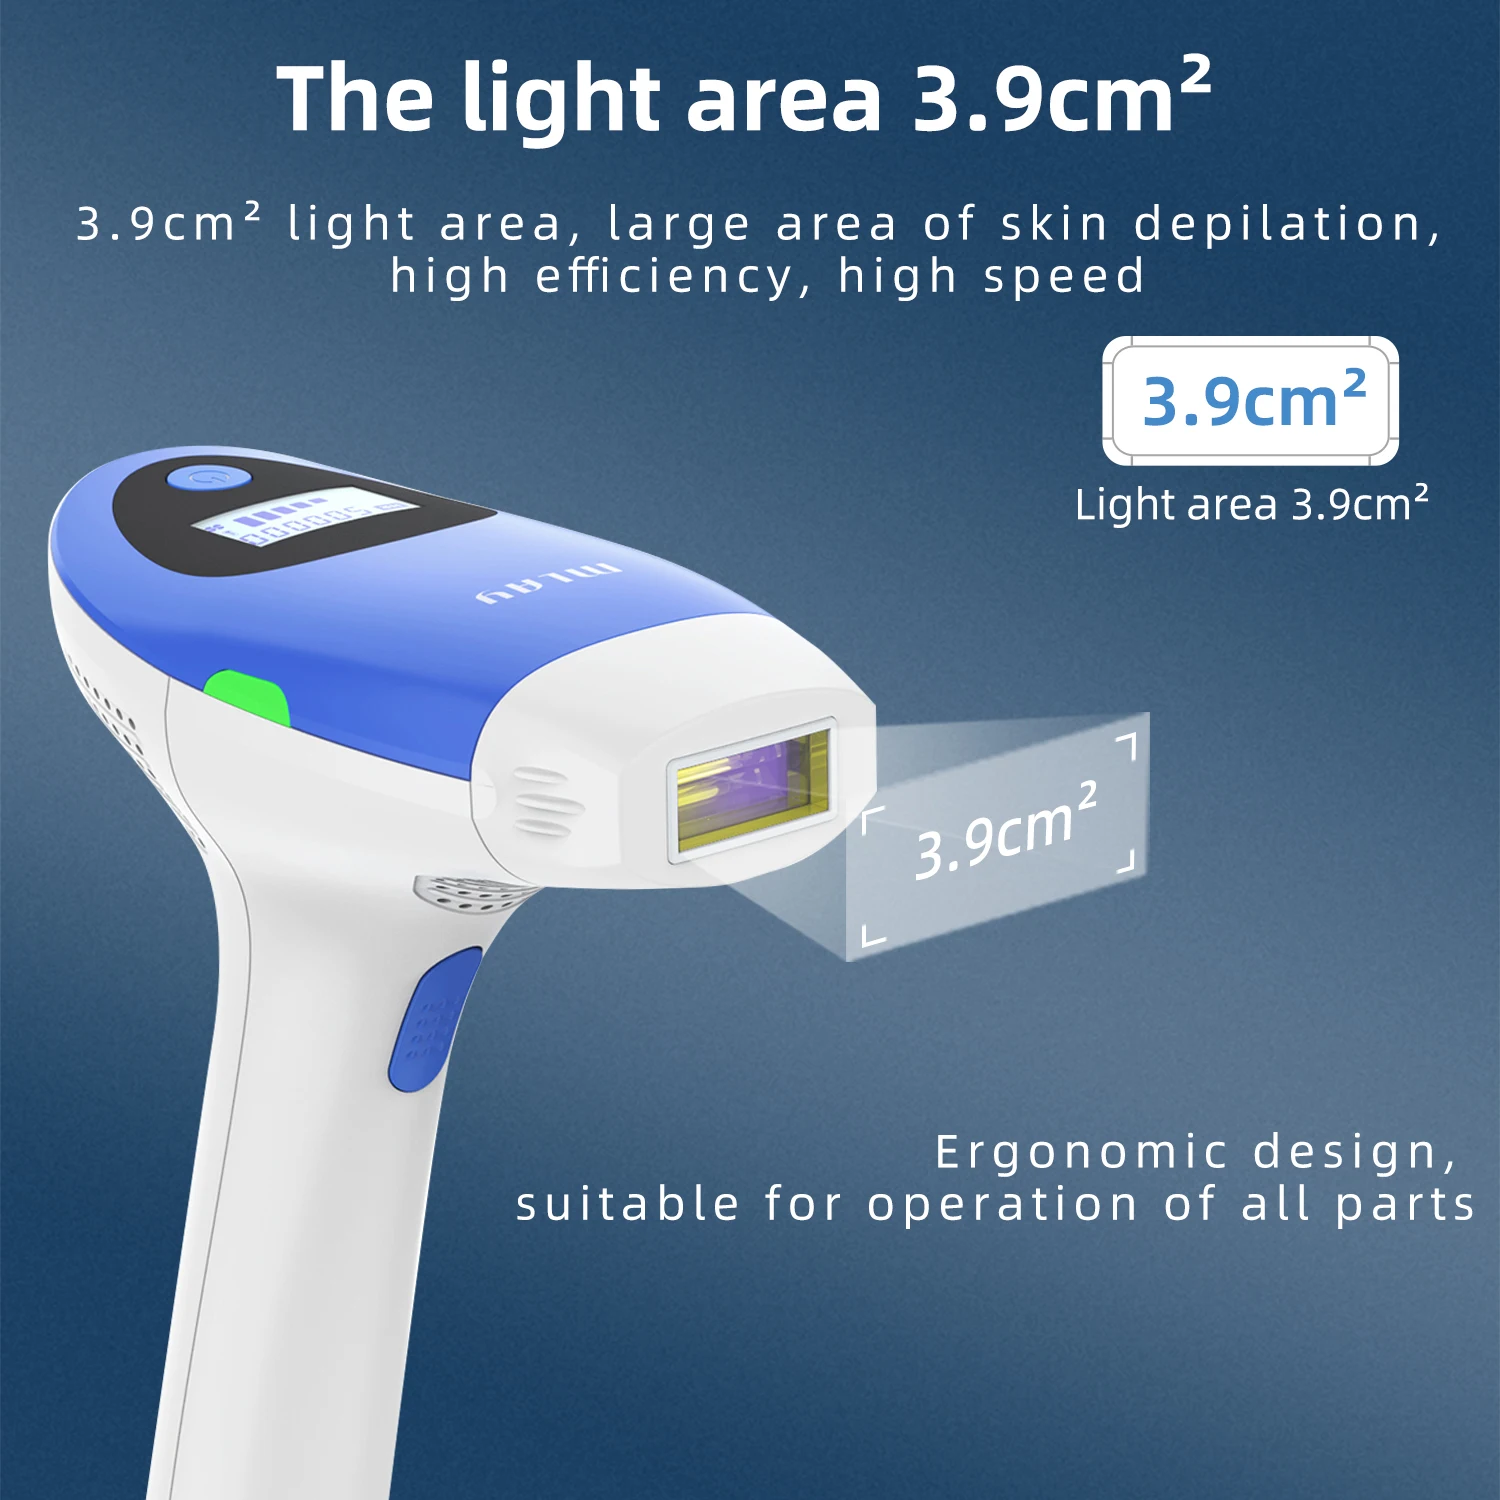 MLAY T3 Home Use Portable Laser Epilator for Facial and Hand Hair Removal UK Plug with Replacement Lamp